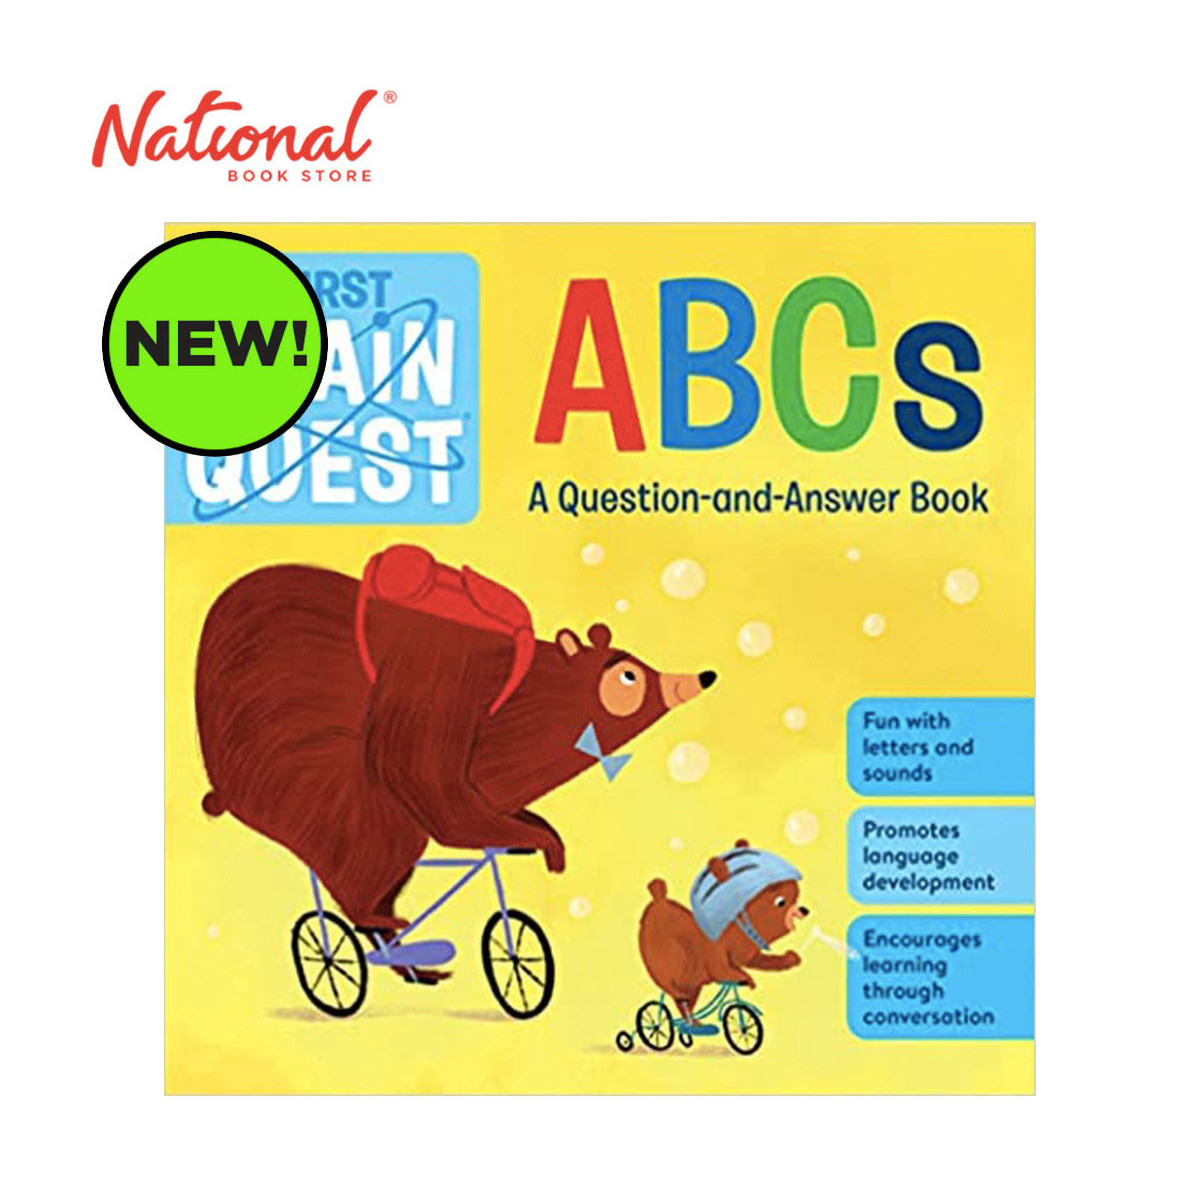 My First Brain Quest ABCs - Board Book - Books for Kids